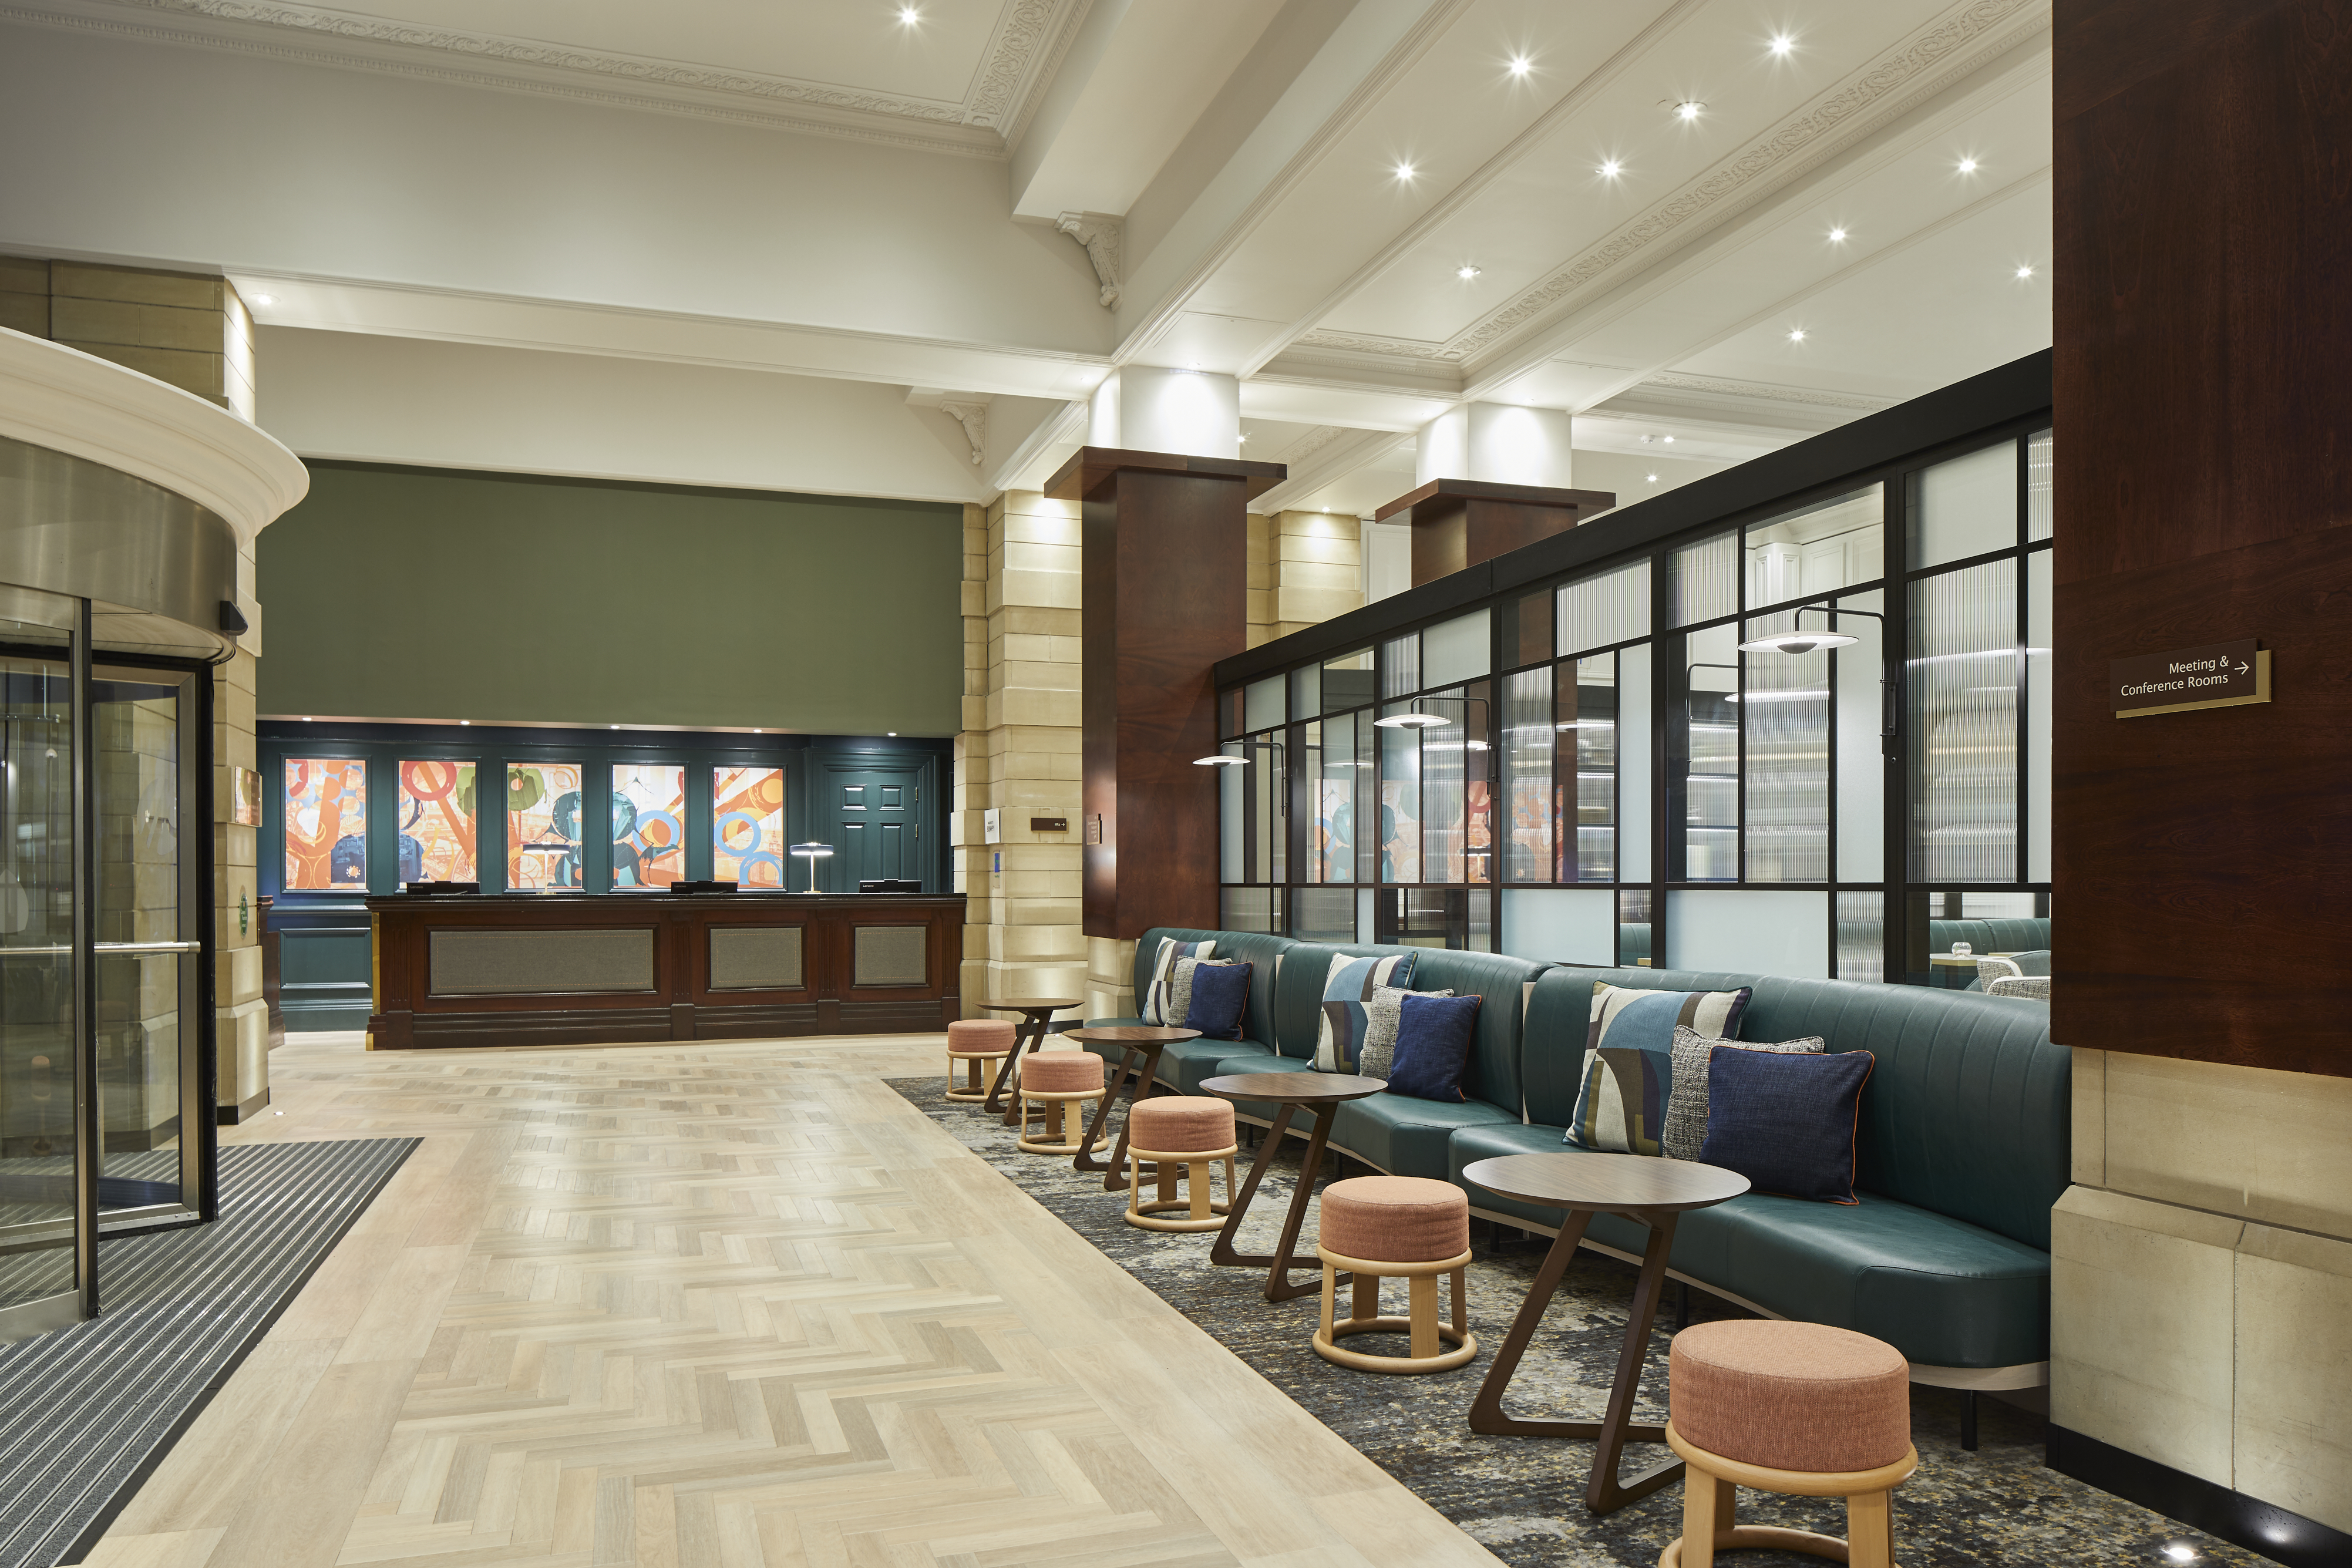 Lobby with upholstered bench seating along the windows, with throw pillows and small round tables